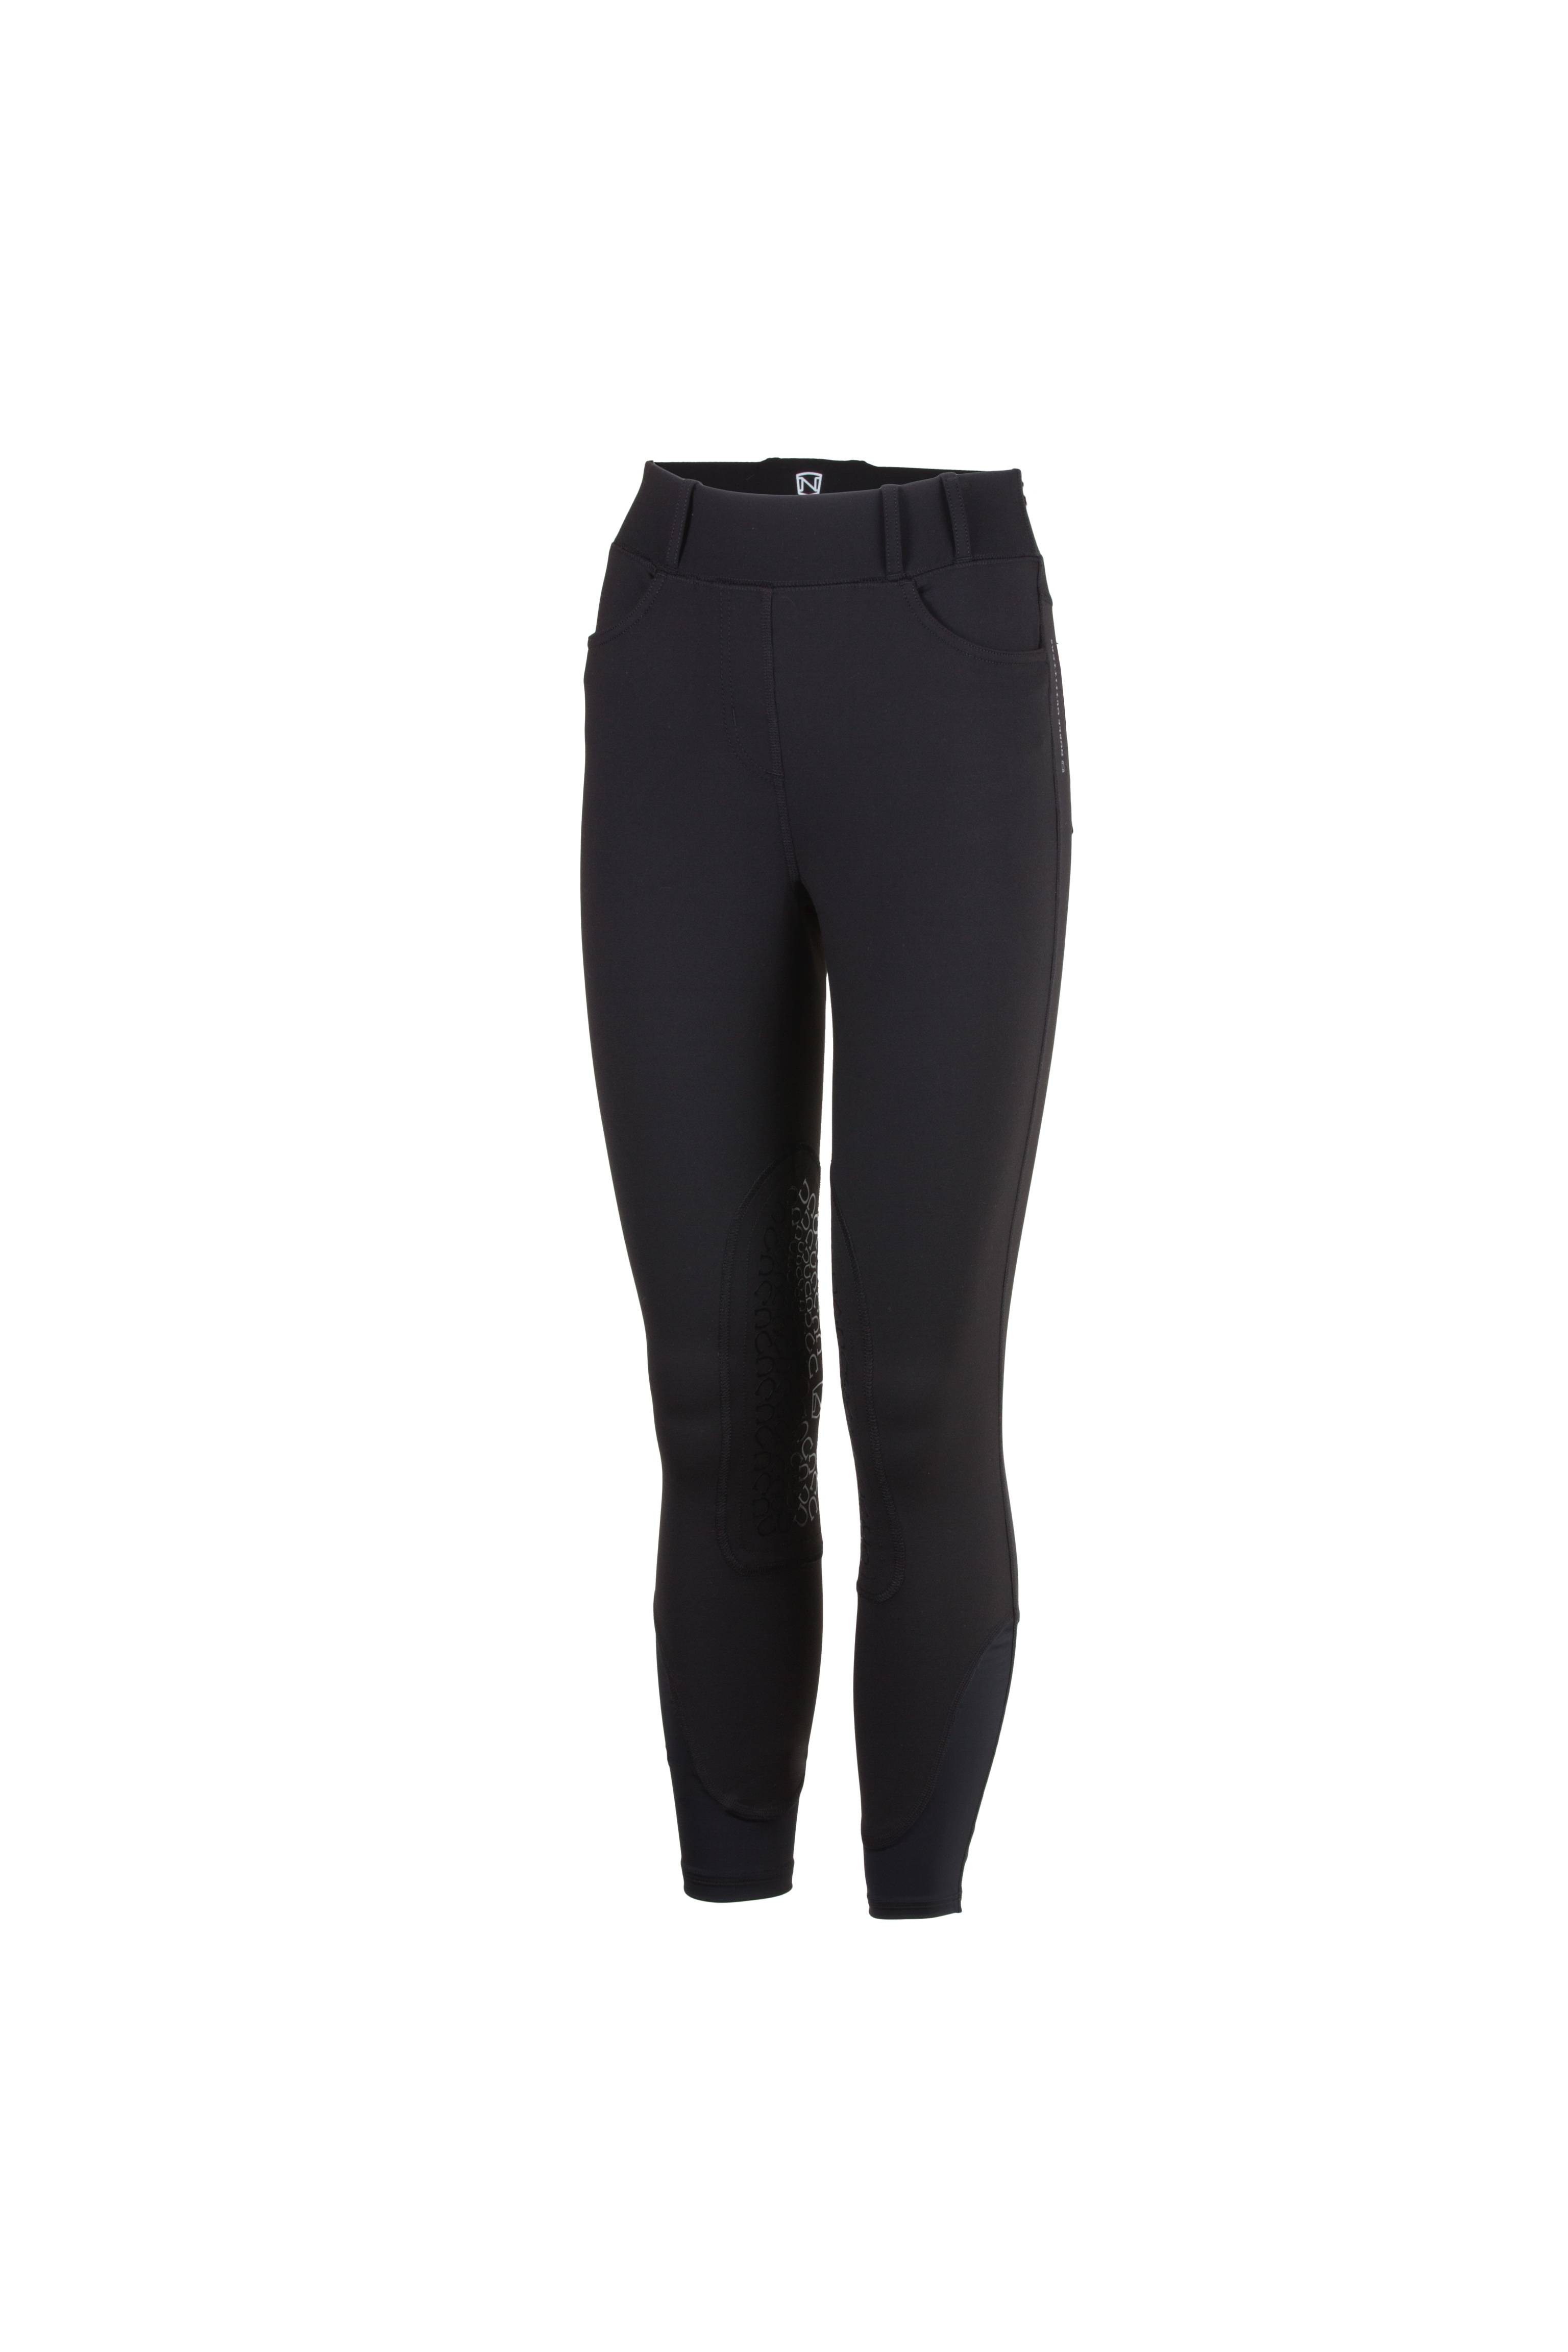 Noble Outfitters Ladies Balance 5 Pocket Riding Tights